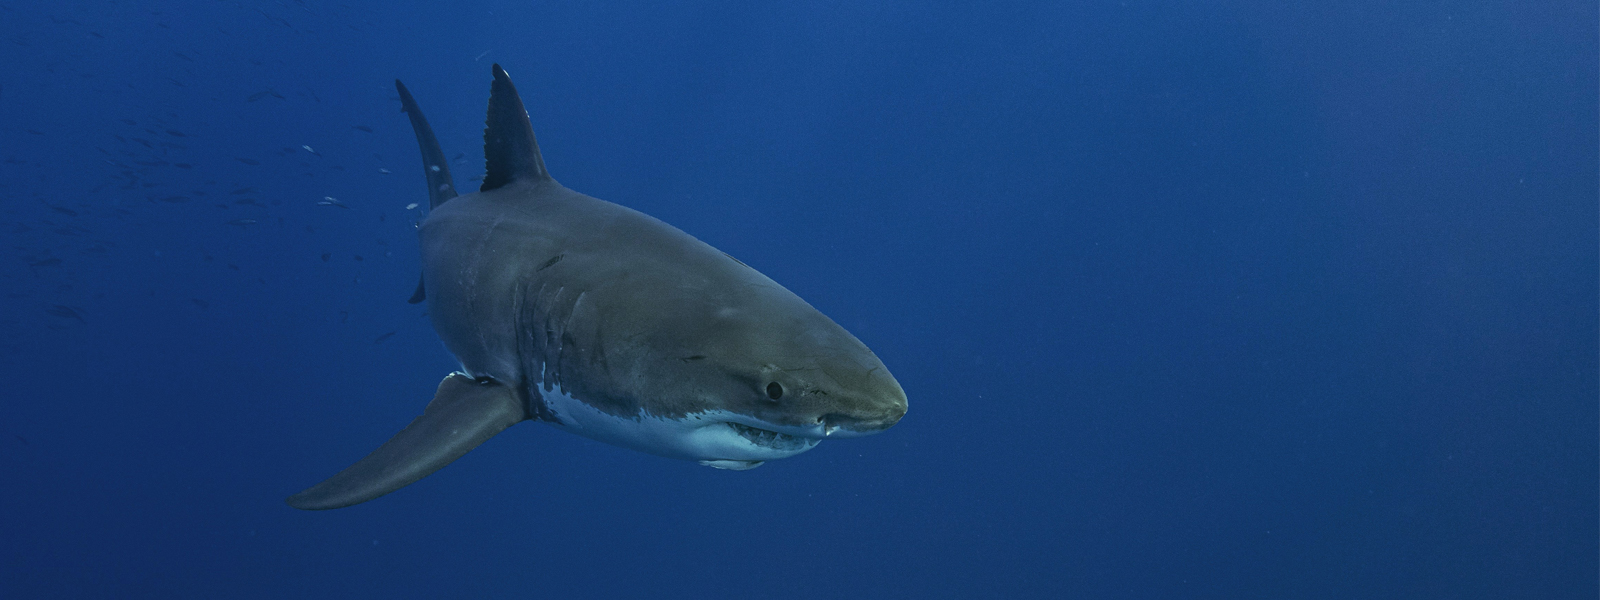 Climate crisis pushing great white sharks into new territory